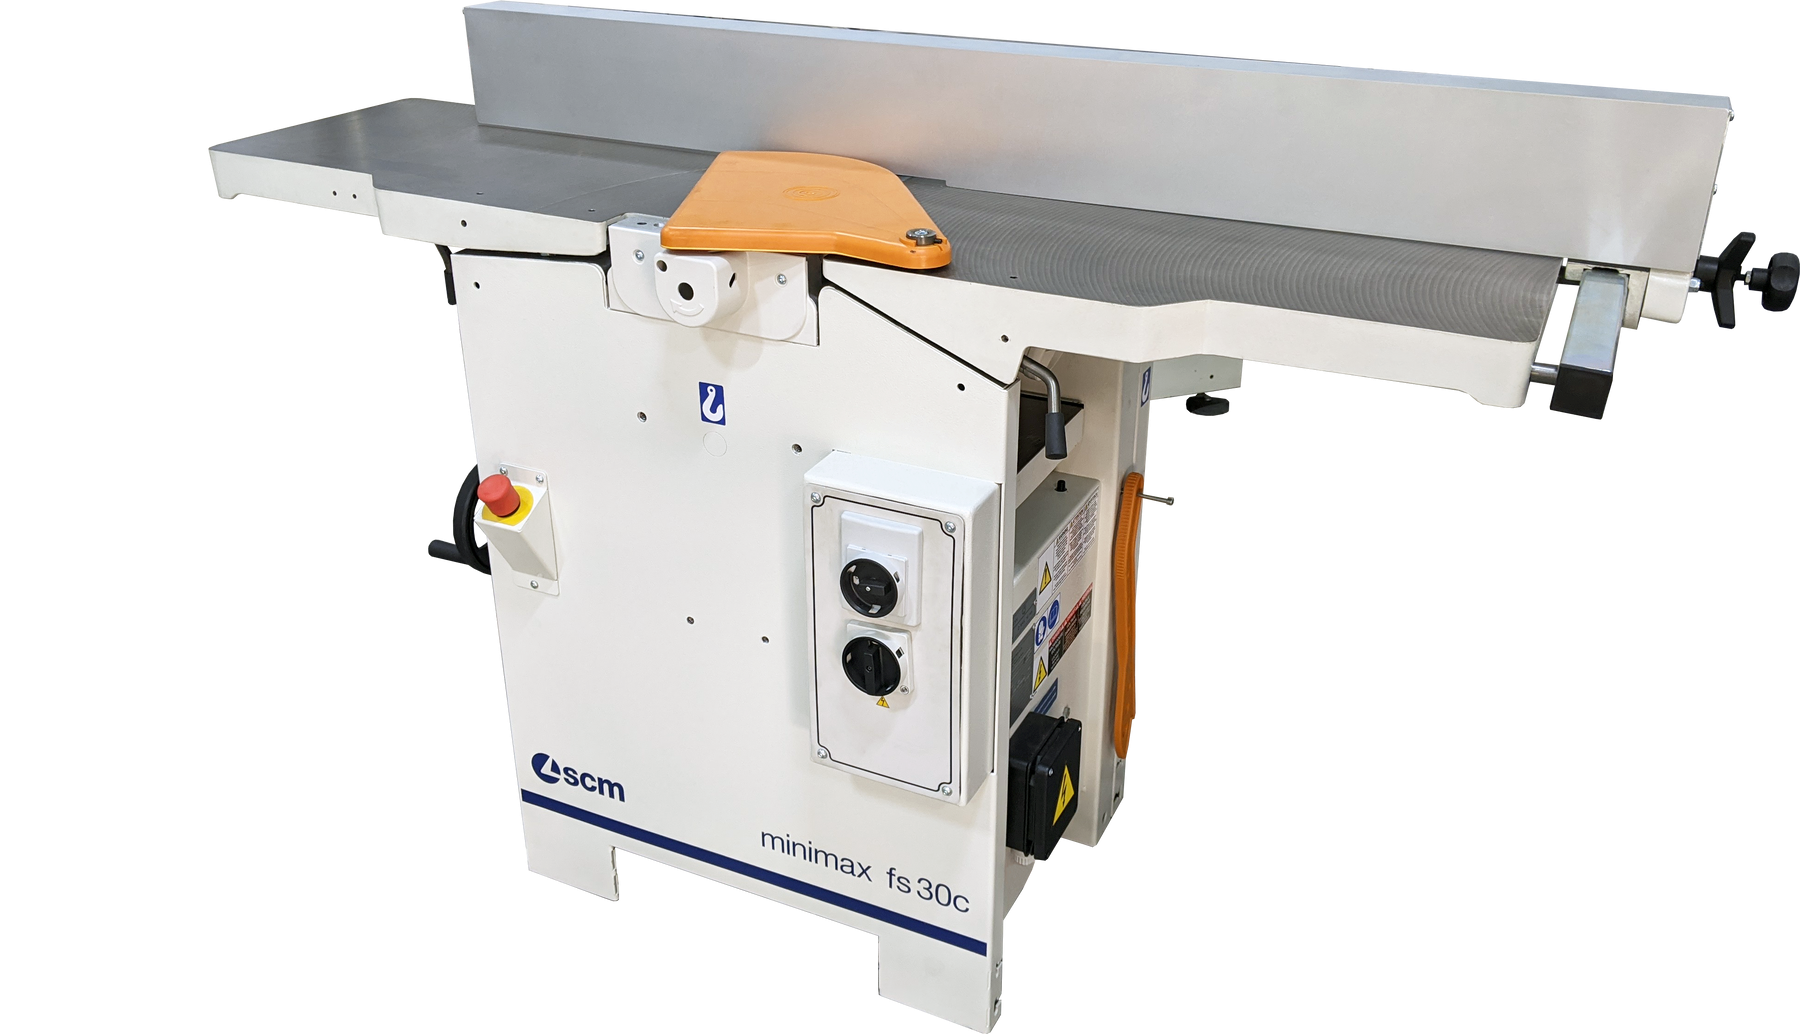 SCM Minimax FS 30C 12" Jointer/Planer with 3-Knife Tersa Quick Change Cutter Head 4.8HP